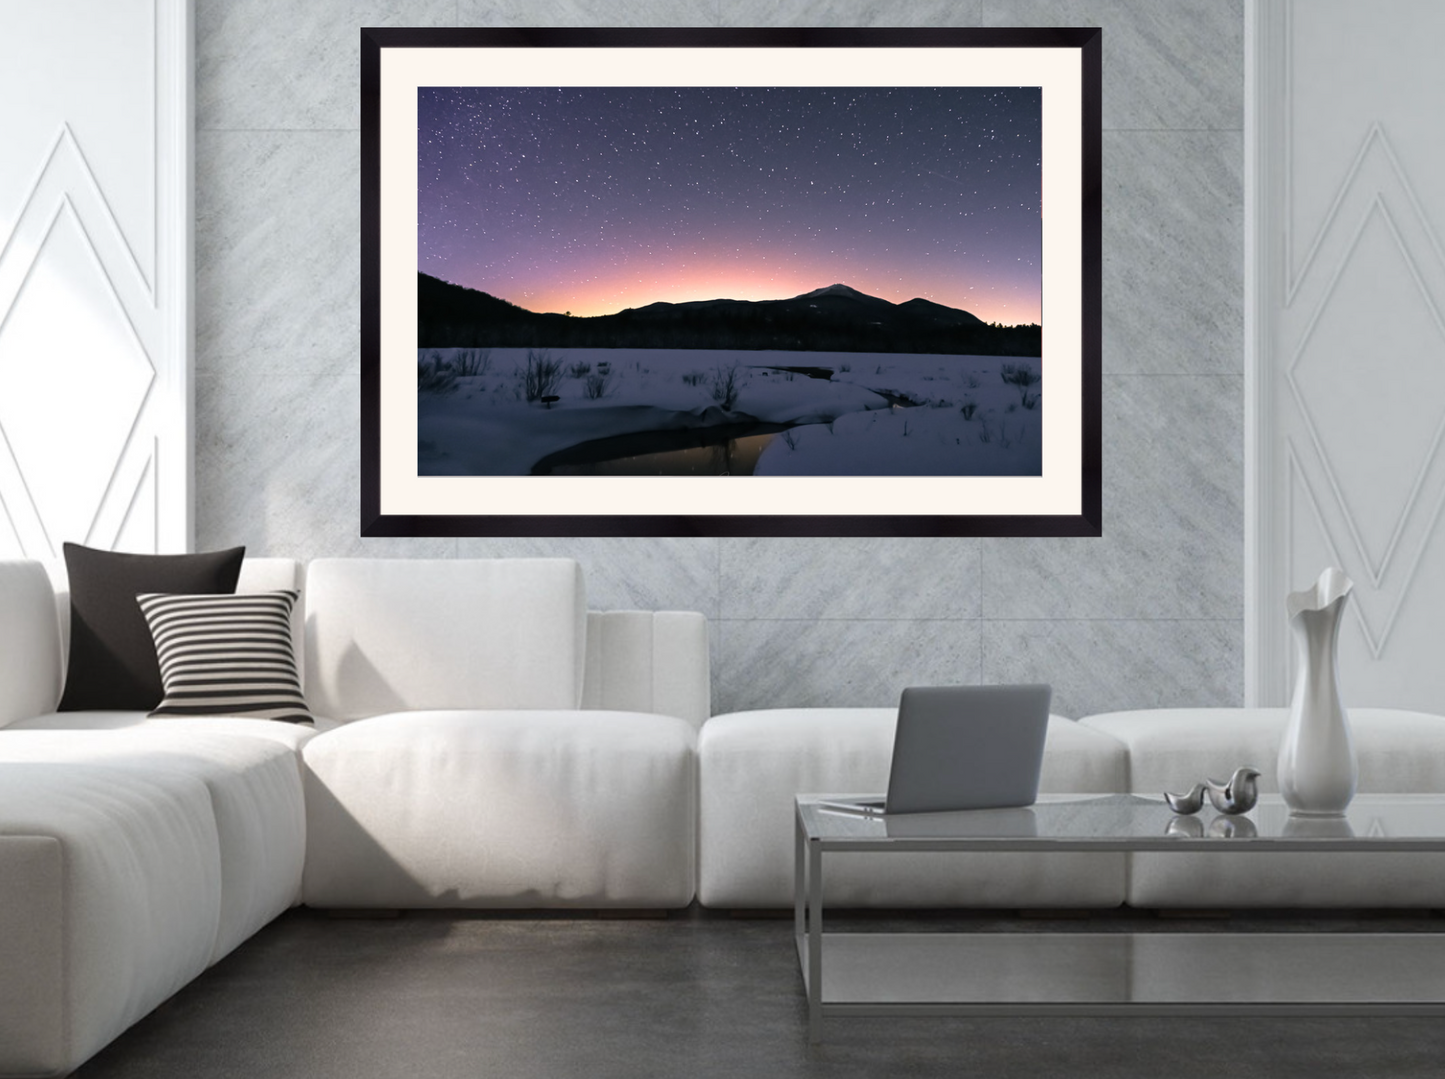 print of a Starlit Aurora over Whiteface